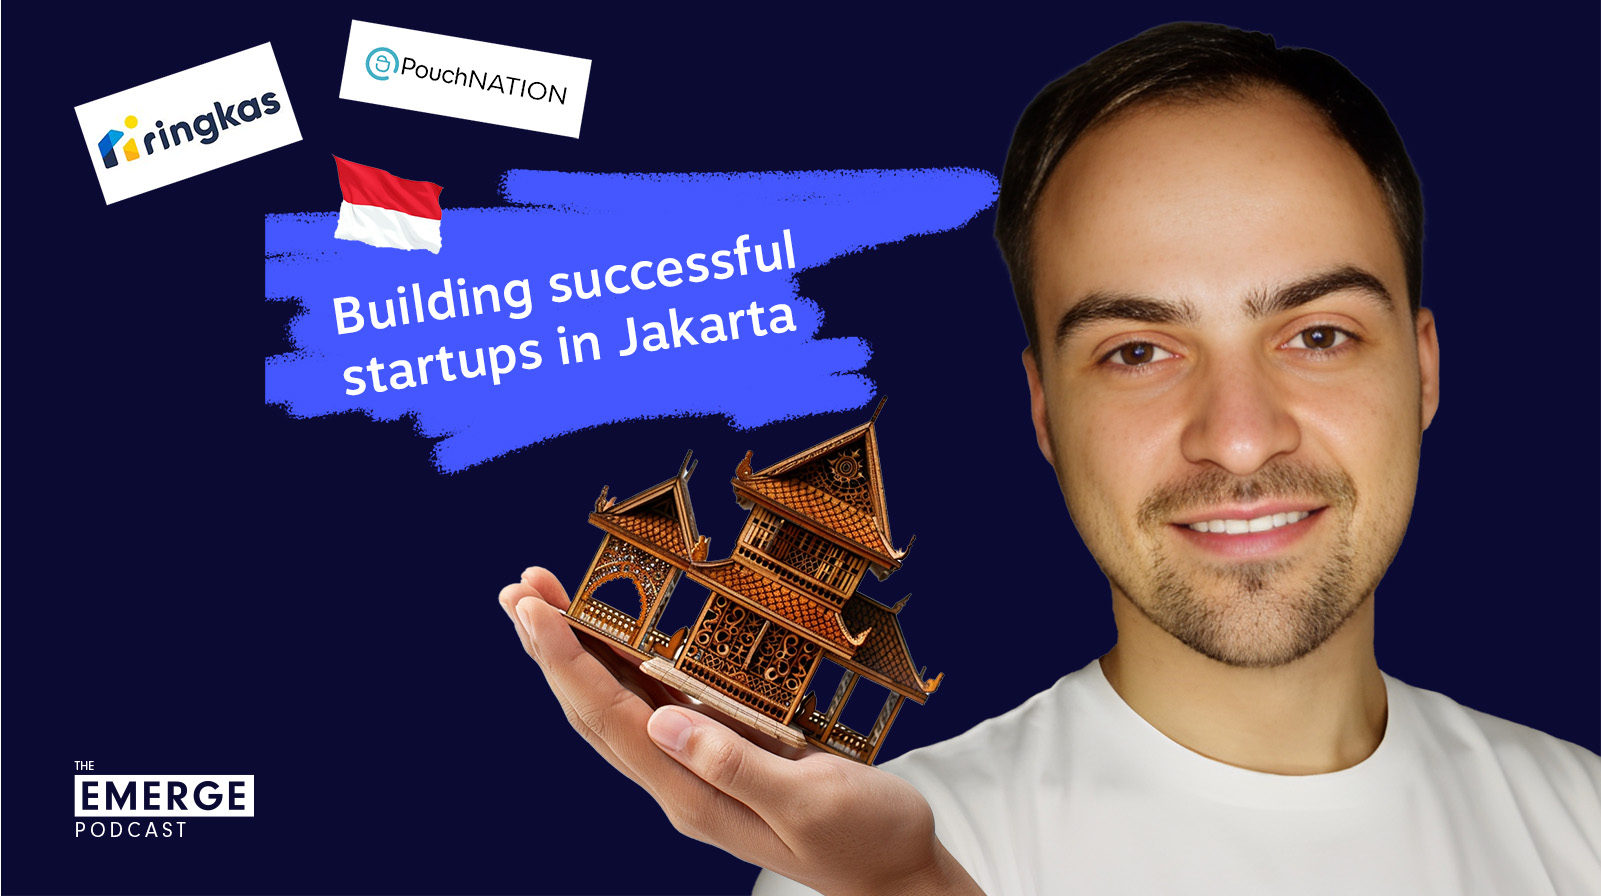 The Emerge Podcast: Building multiple successful startups in Indonesia with Ilya Kravtsov